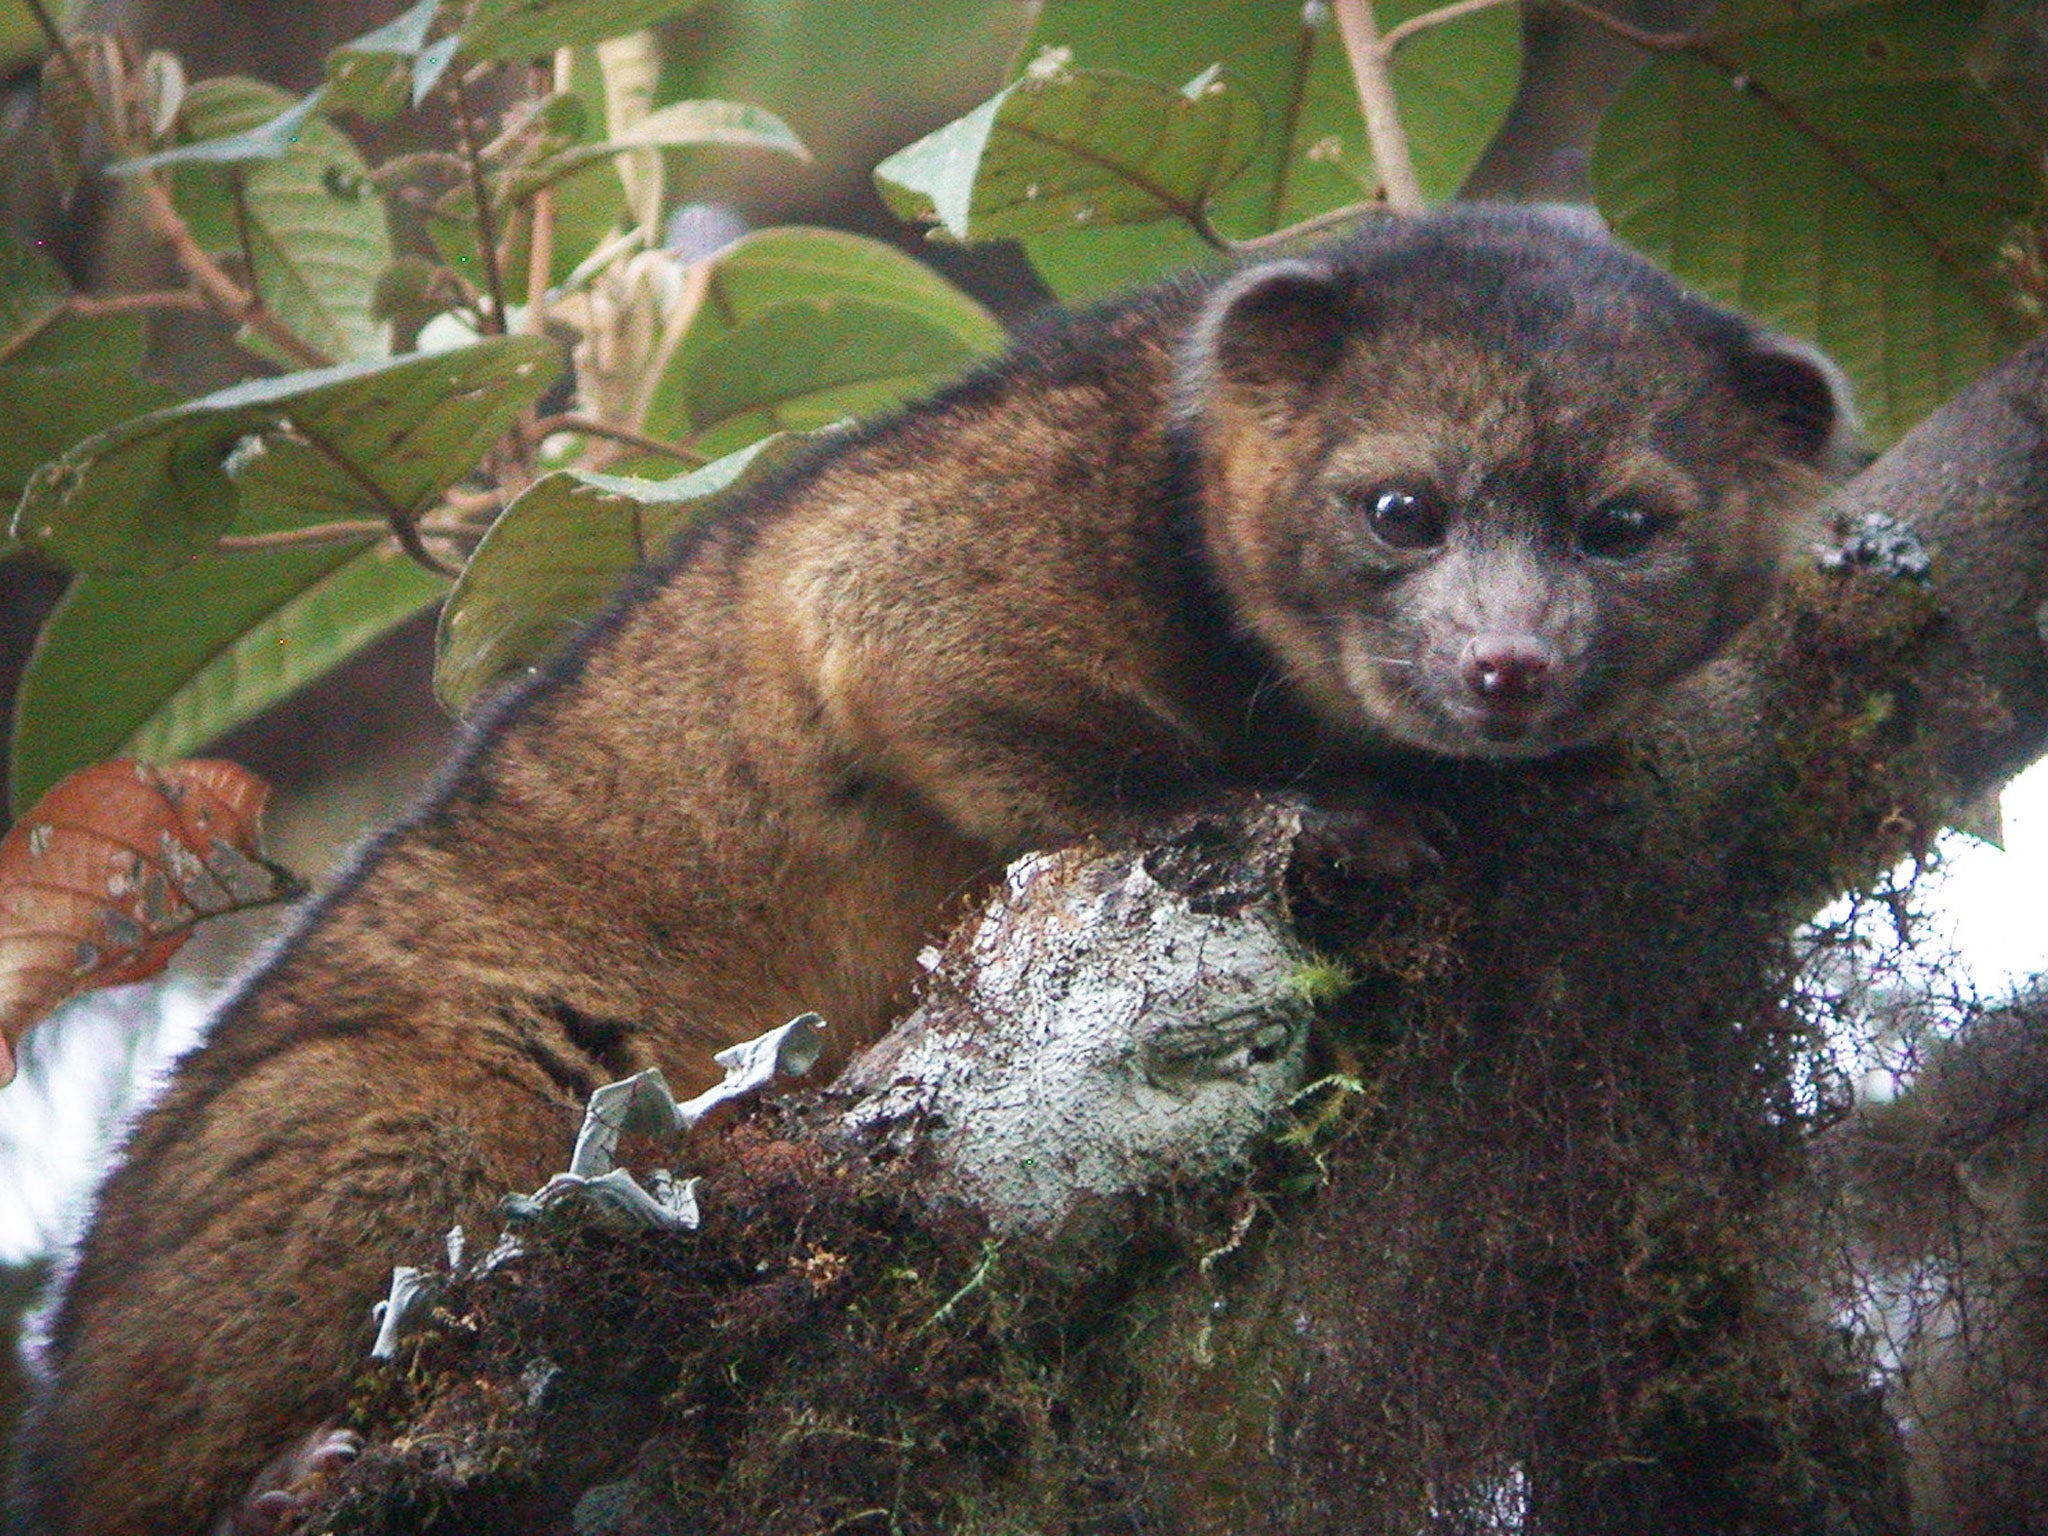 The olinguito was found in the forests of Colombia and Ecuador